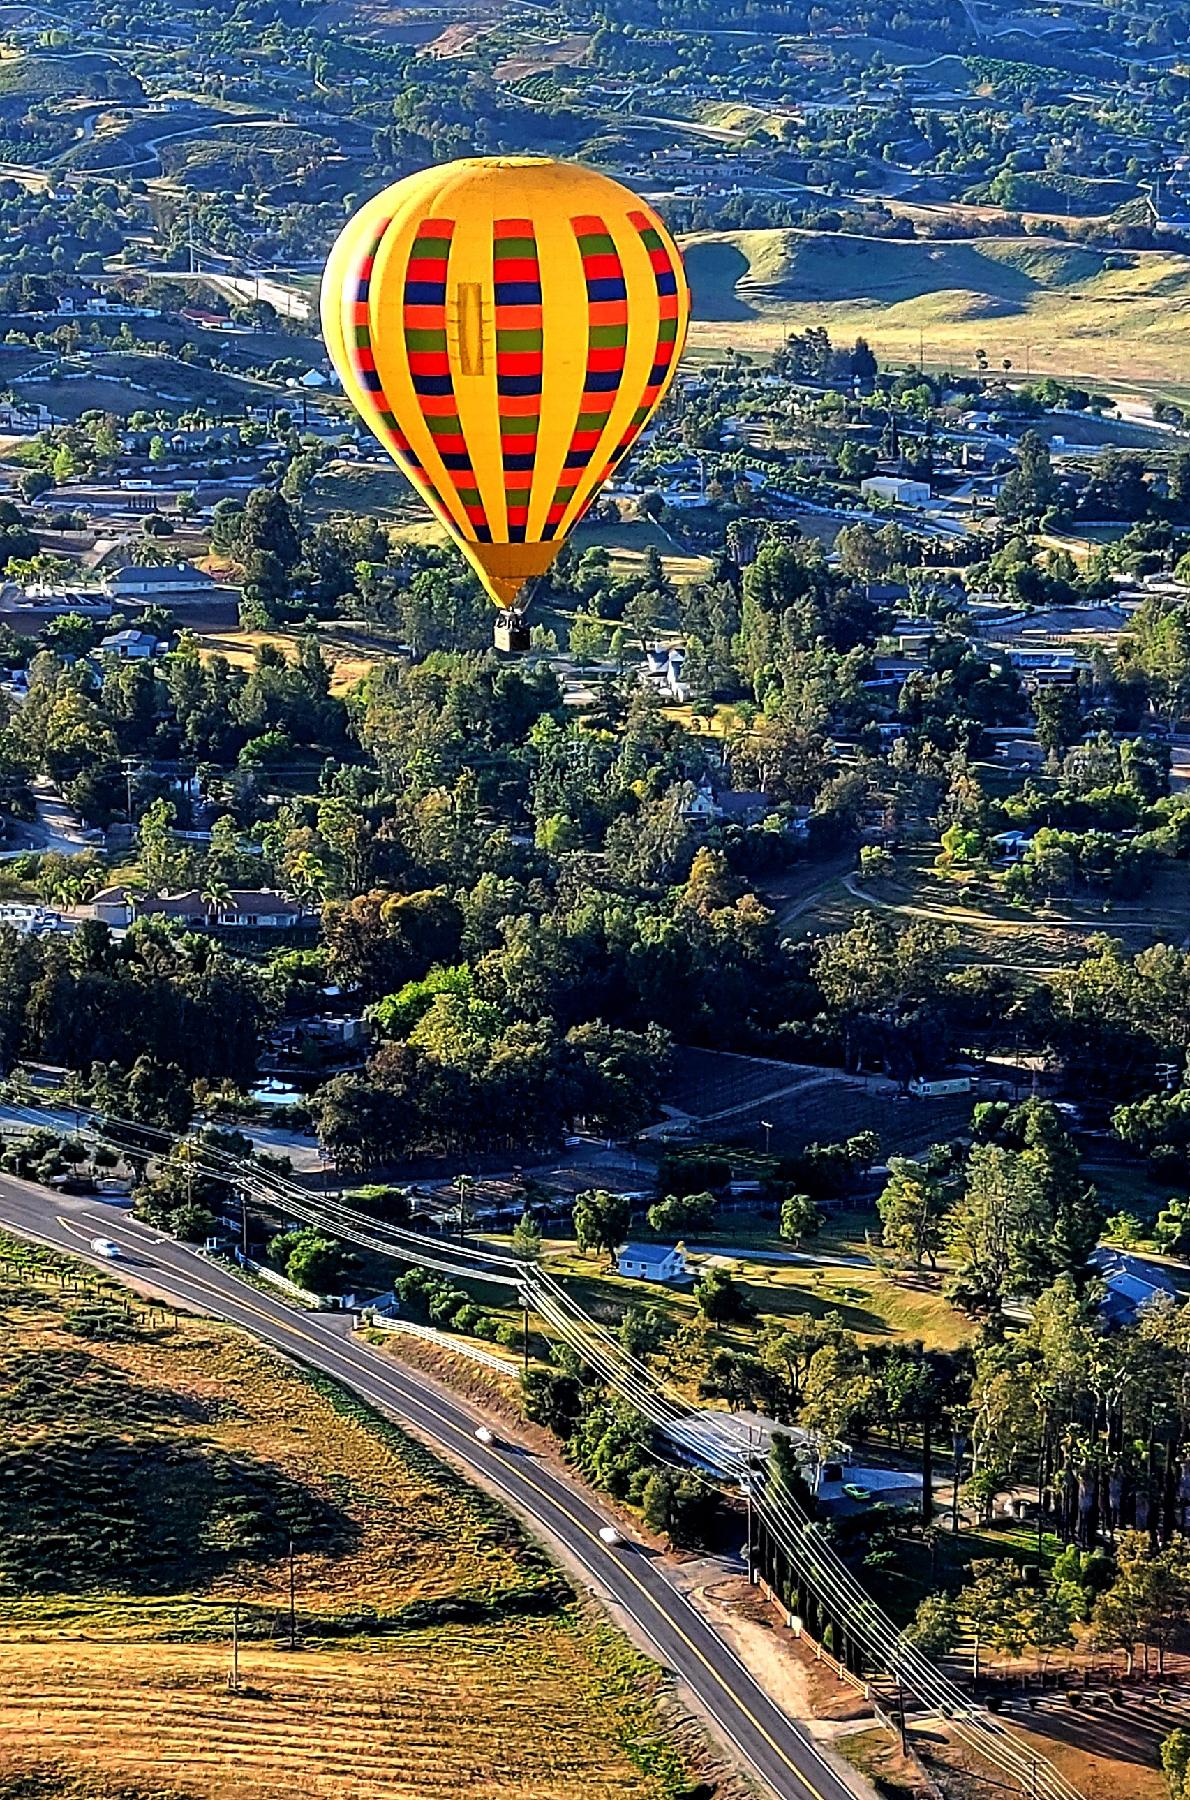 One of the best ways to see Temecula, California, is by hot-air balloon. (Photo courtesy of Jim Farber.)